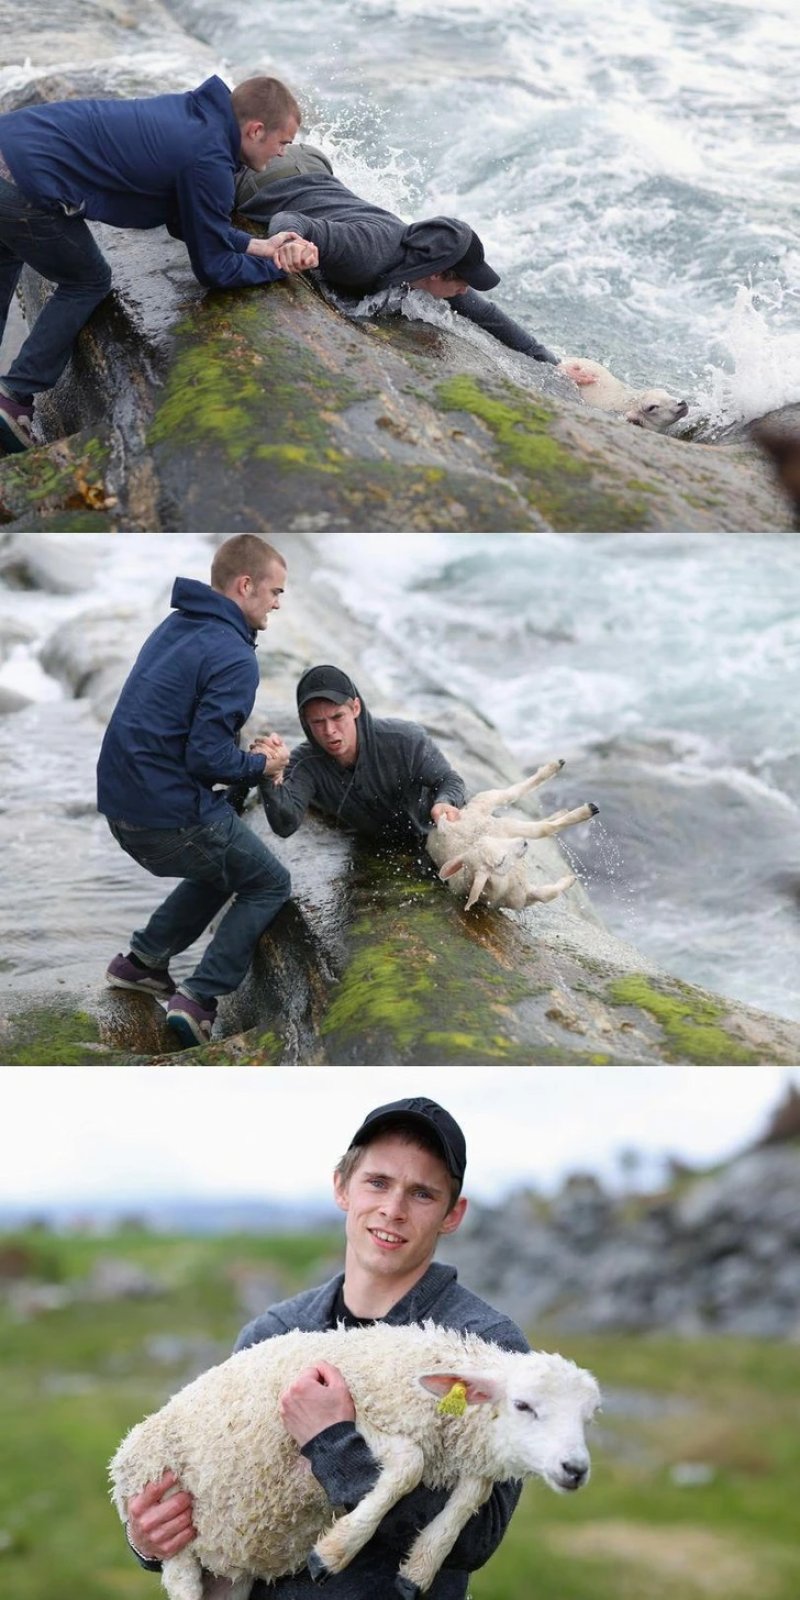 These 2 guys from Norway risked their lives to save a lamb from the ocean: